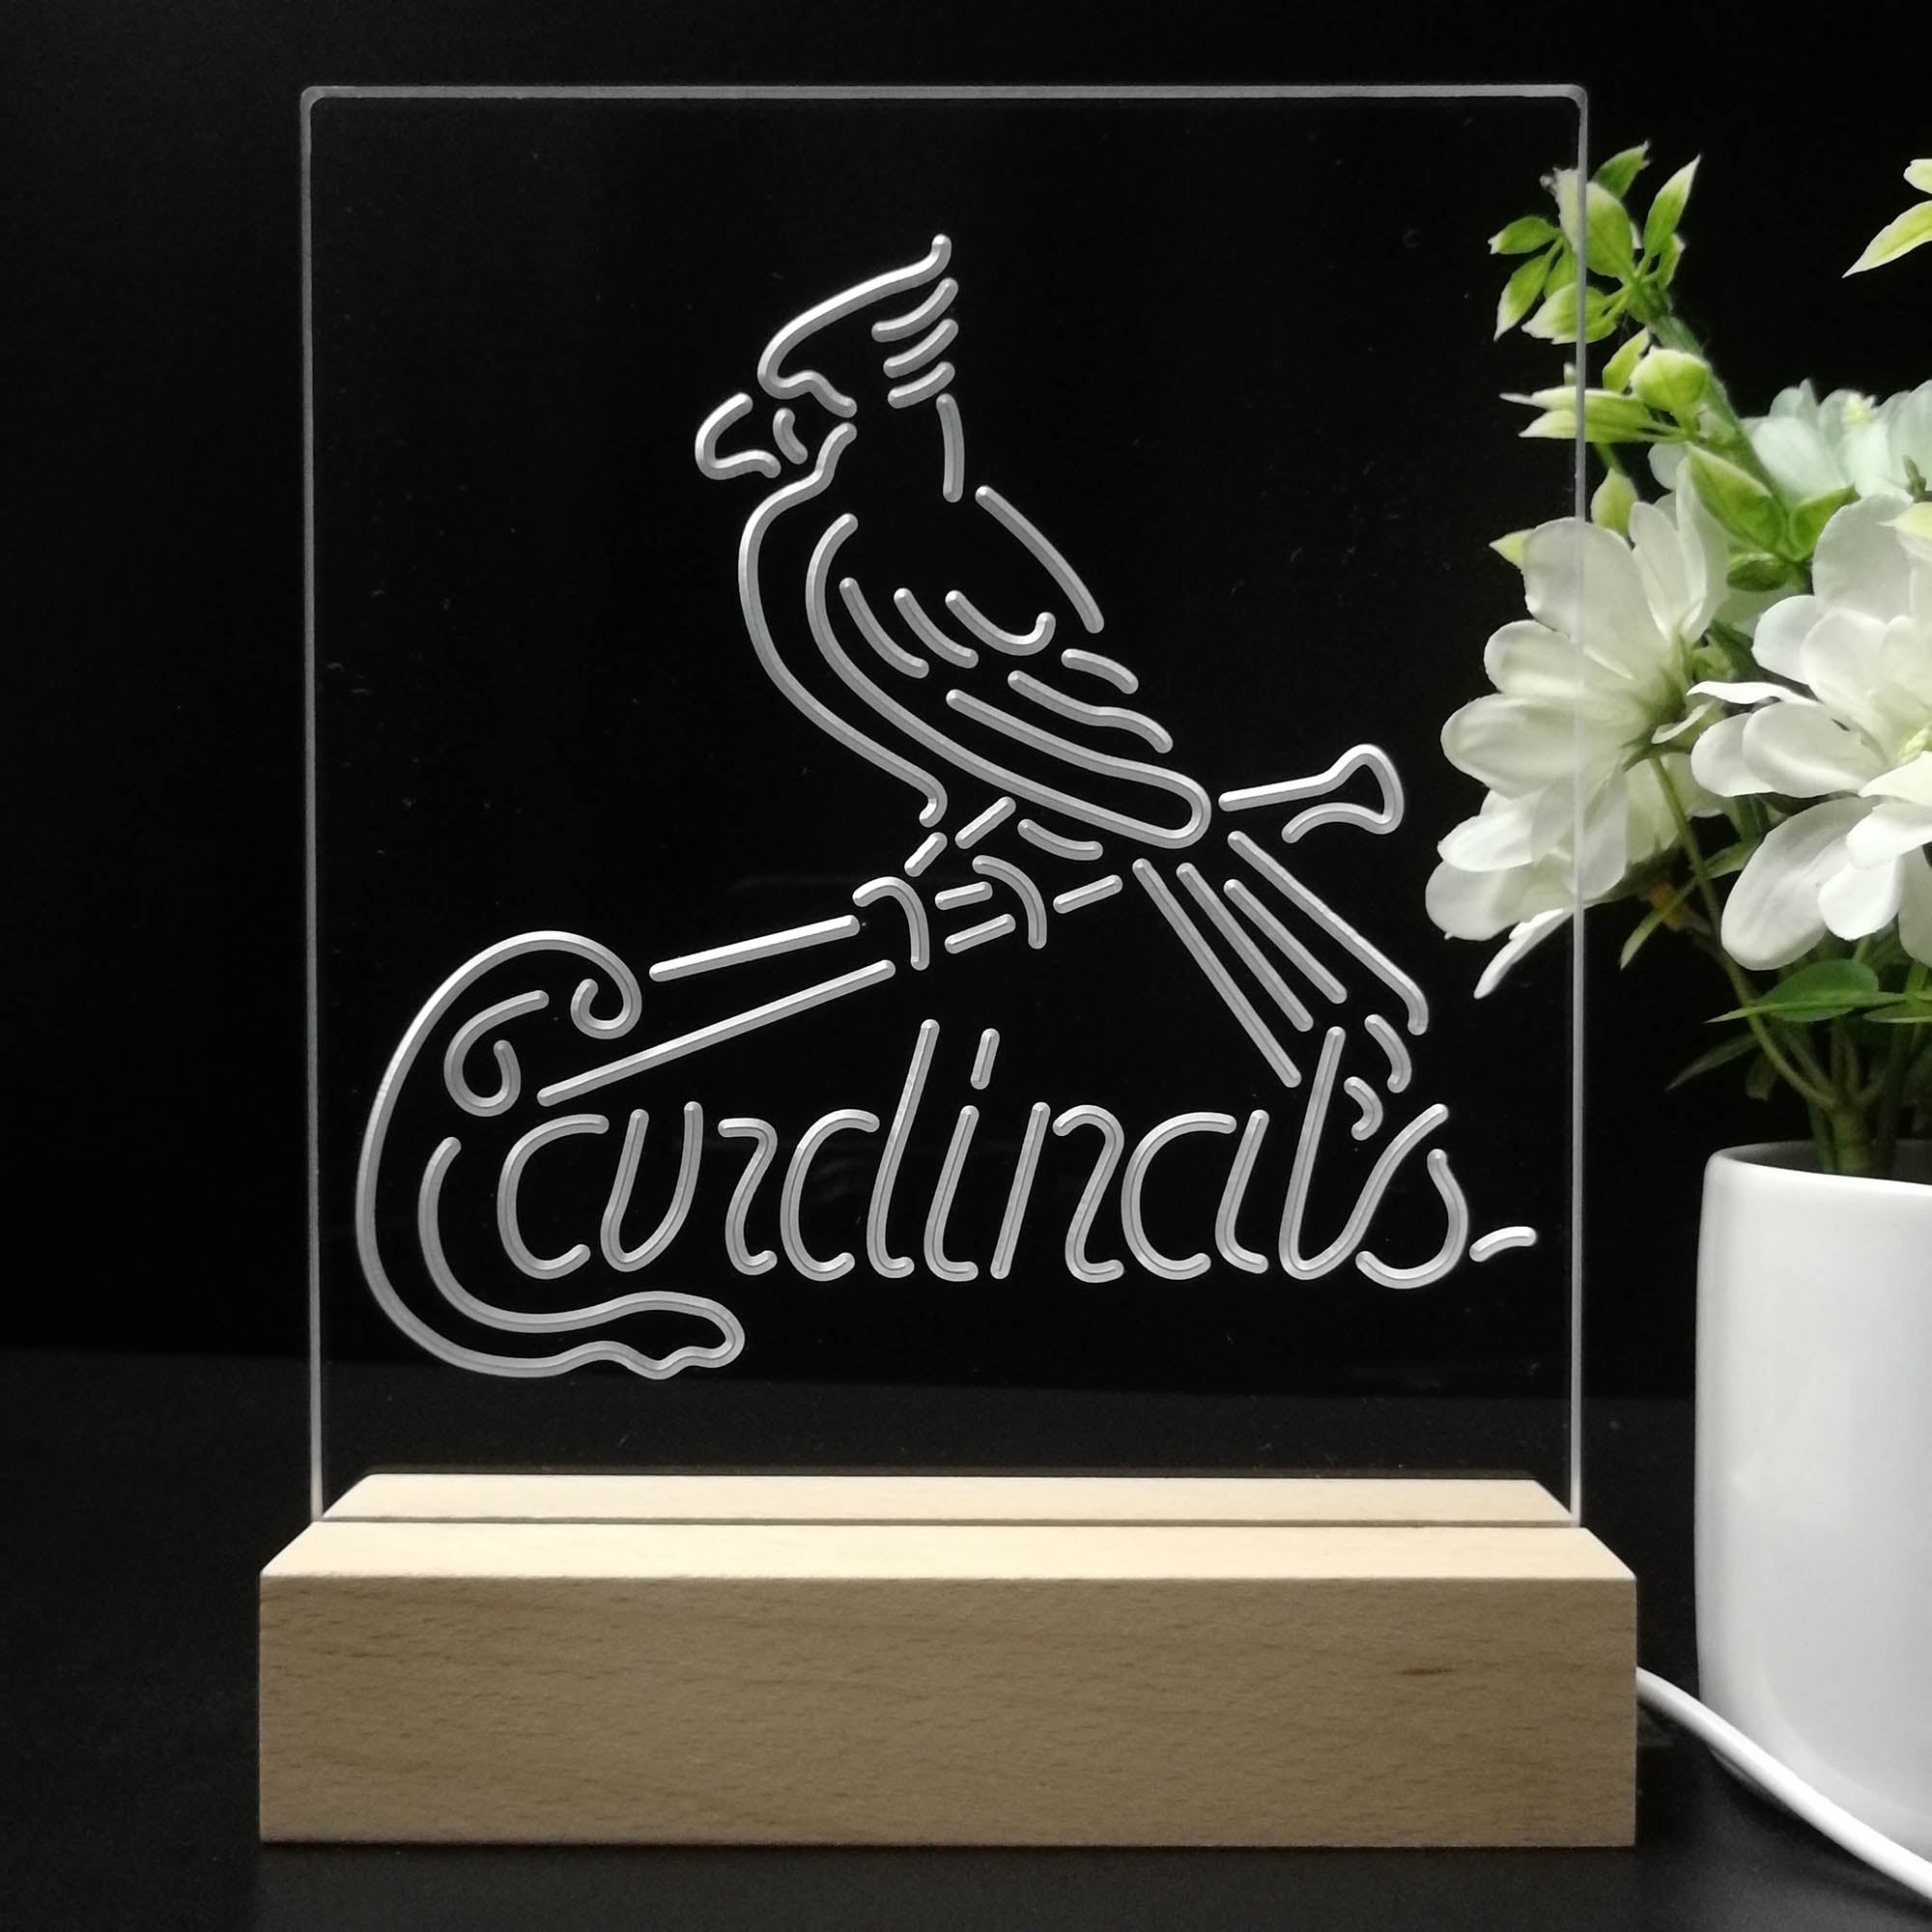 New St. Louis Cardinals Neon Sign 20x16 with HD Vivid Printing Technology